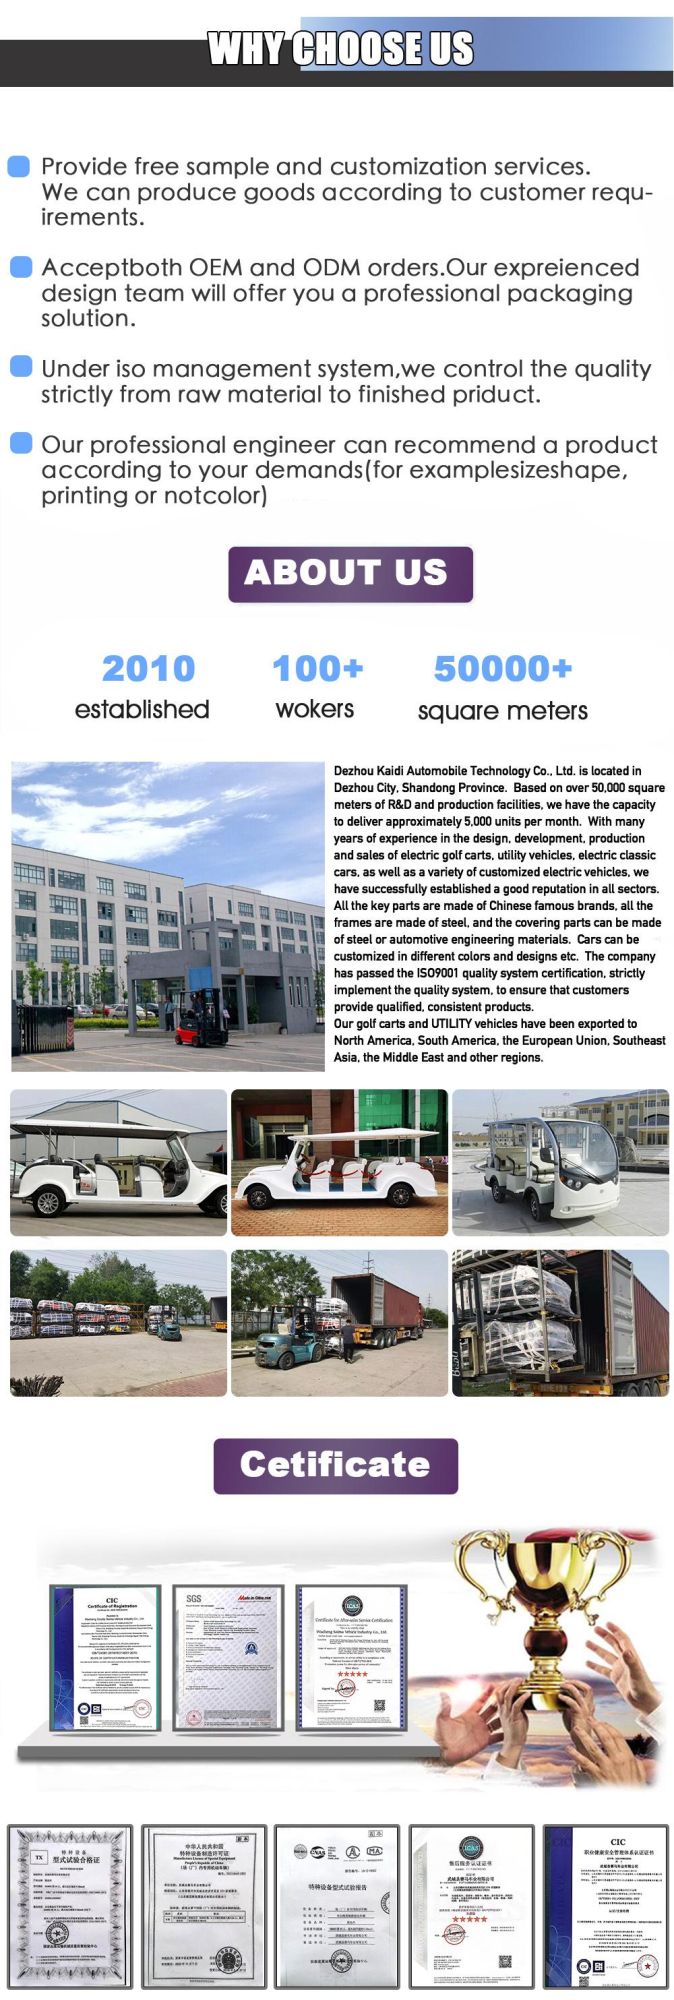 14 Seats Electric Sightseeing Car Battery Powered AC Motor Have CE Certificate on Sale for Hotel Resort